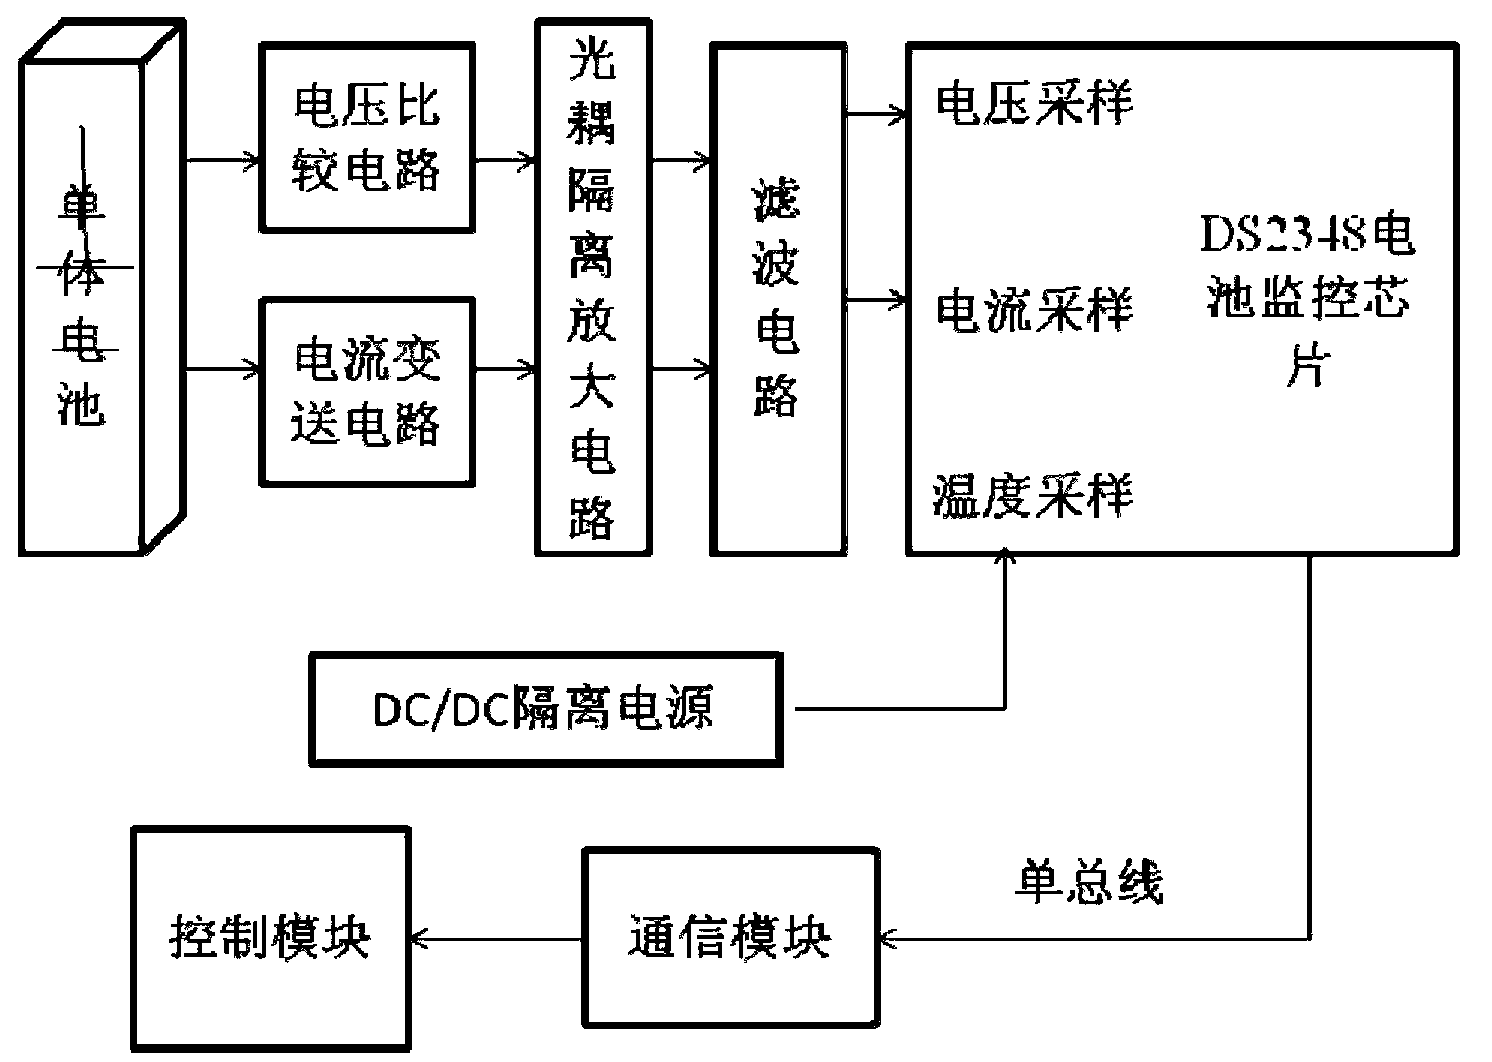 Data collection and energy balance control device and method for lithium battery pack of electromobile